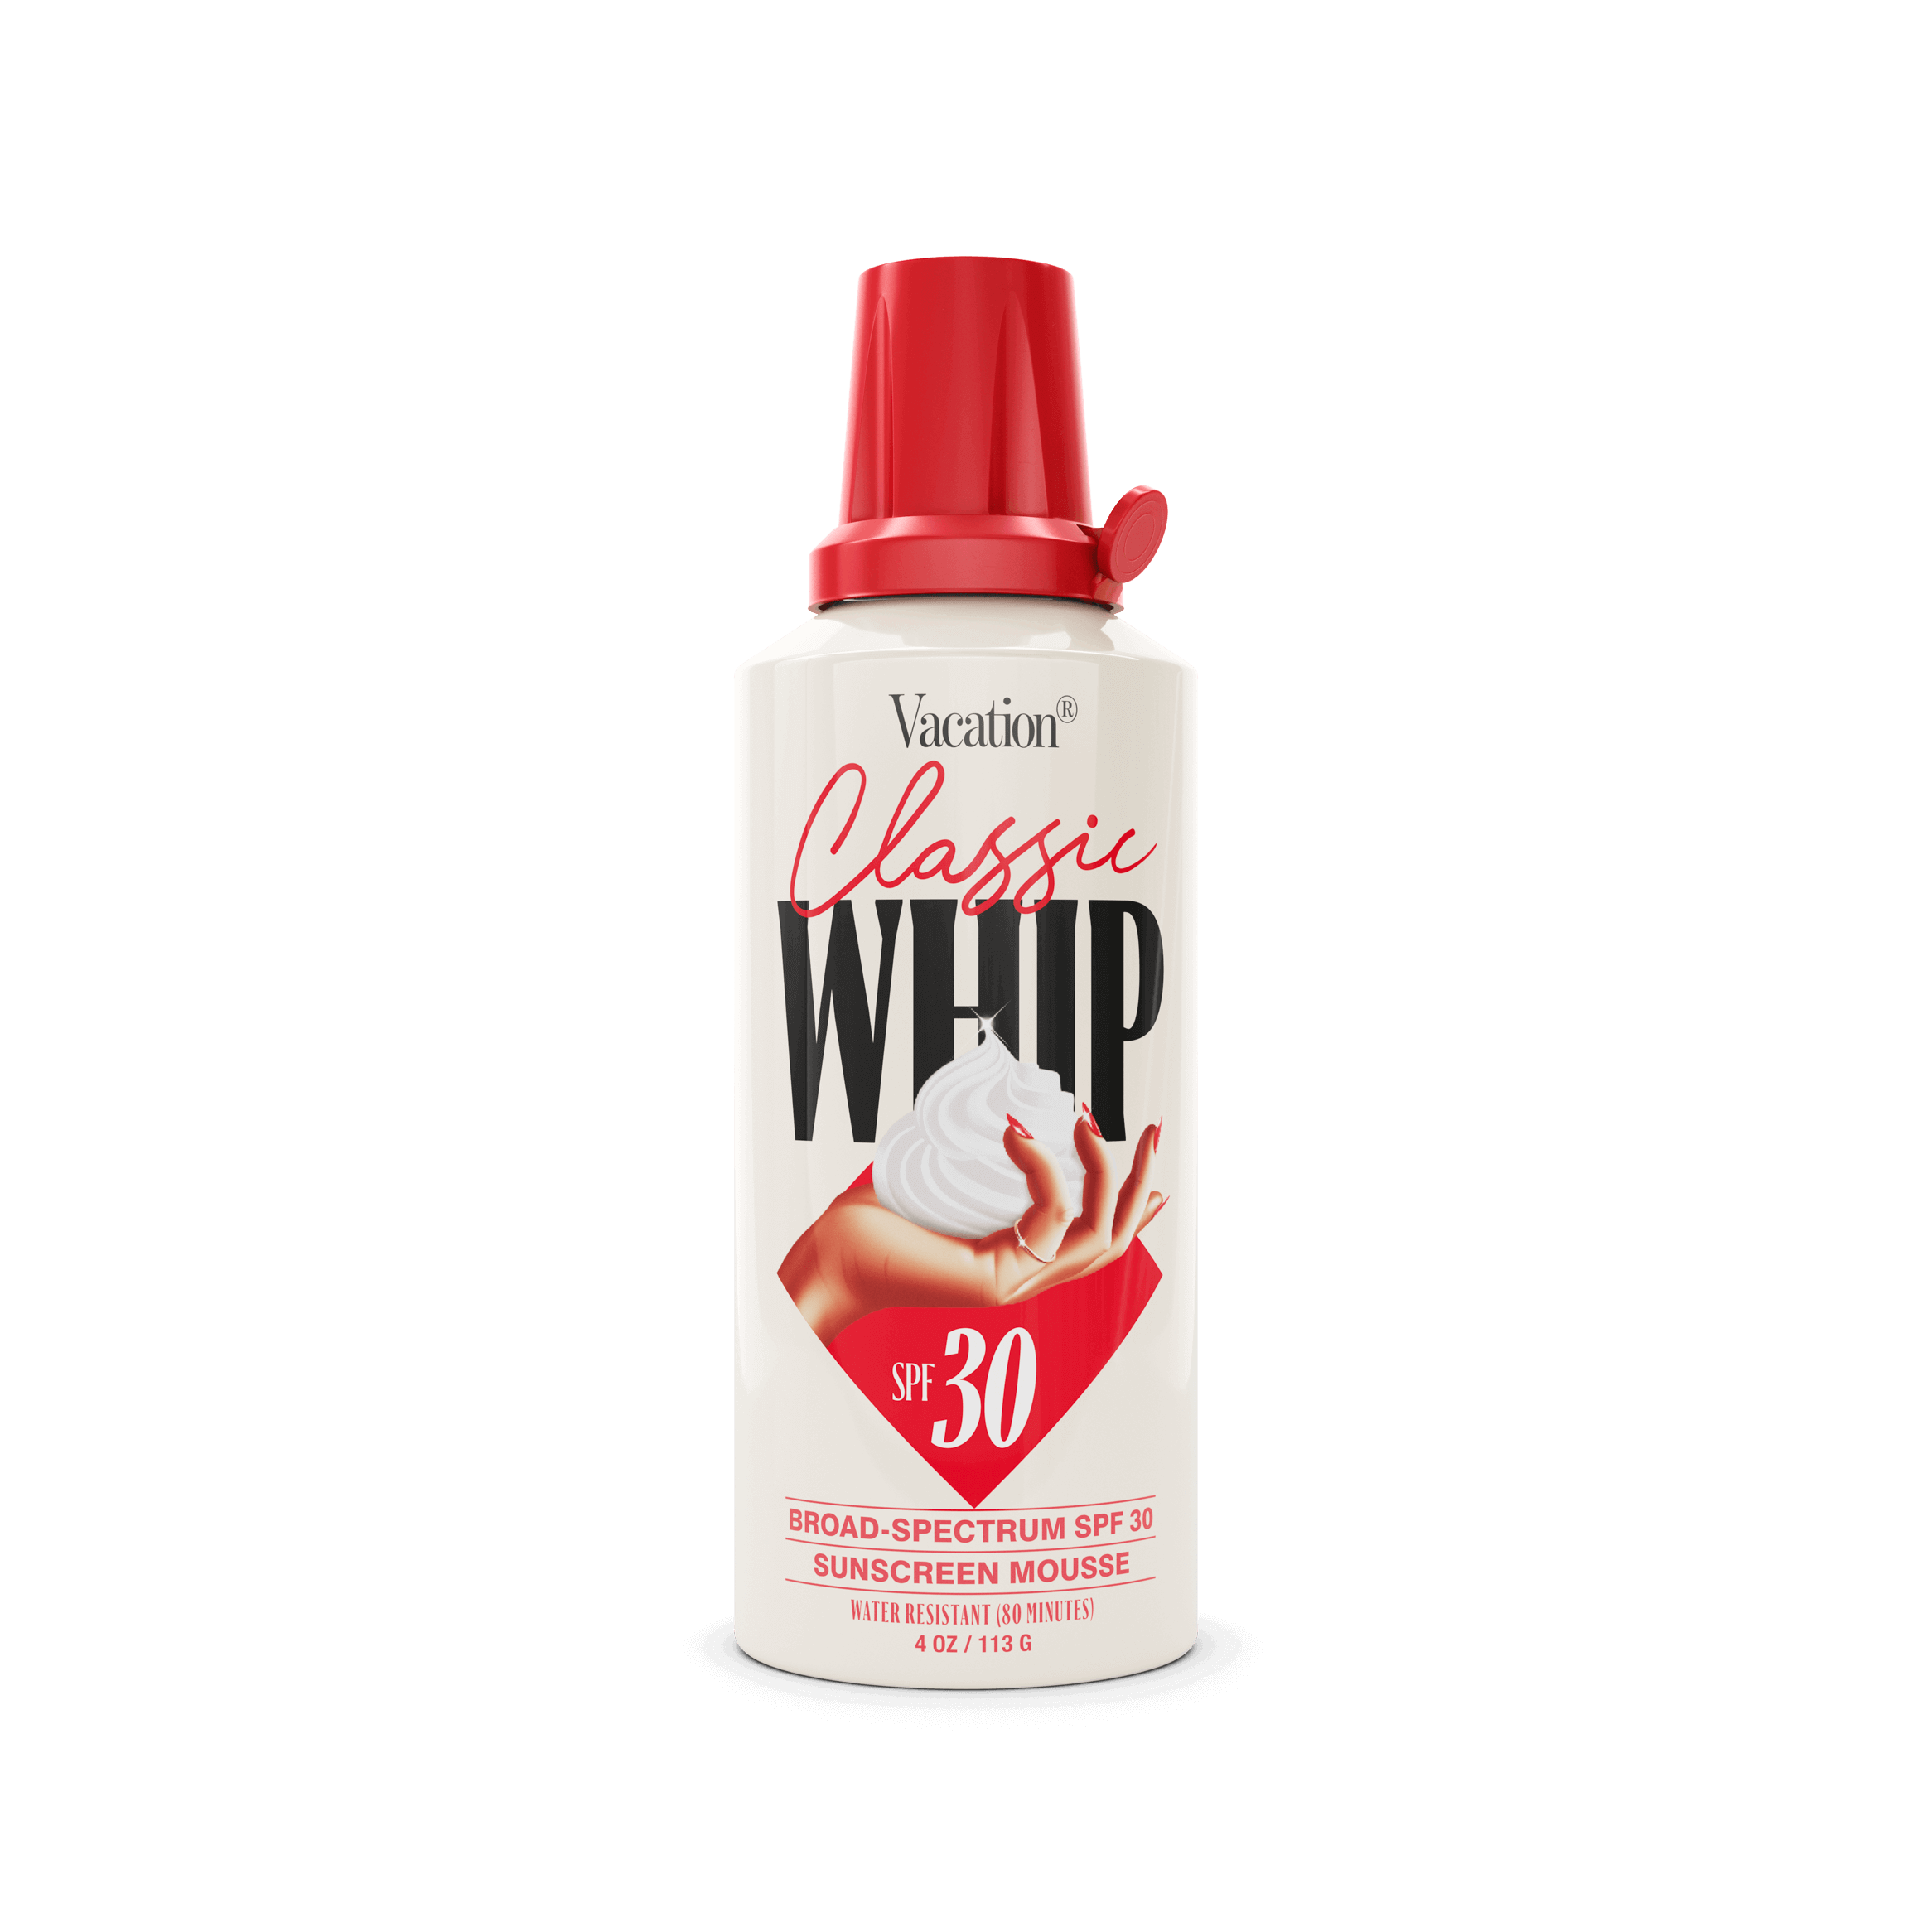 Classic Whip SPF 30+ Whipped Sunscreen